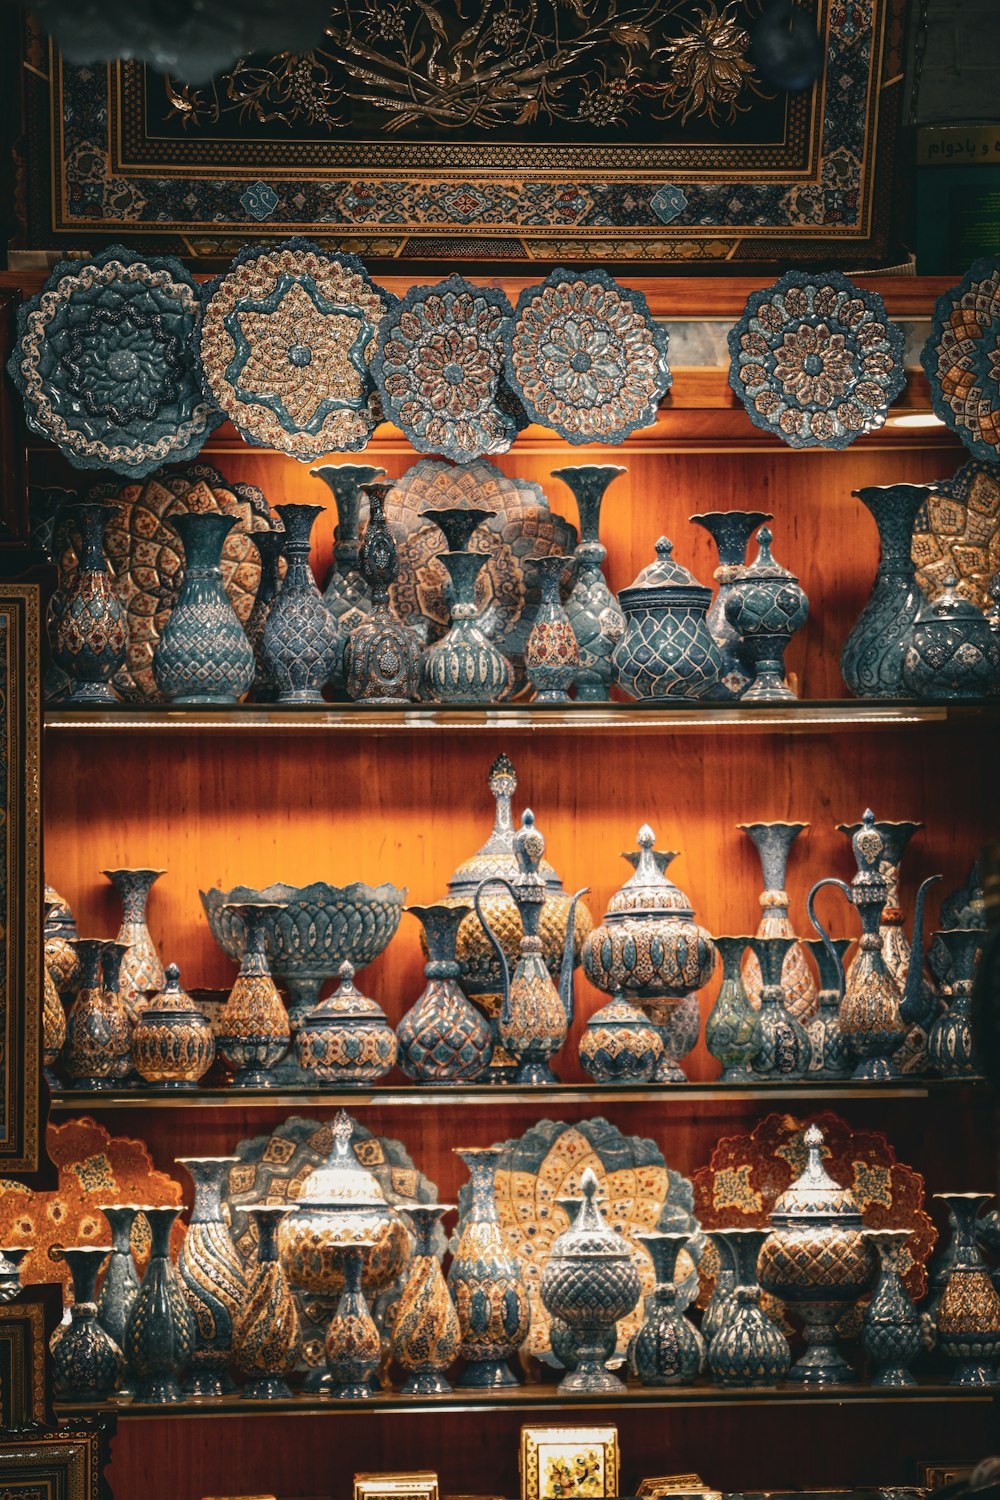 a shelf with many vases on it